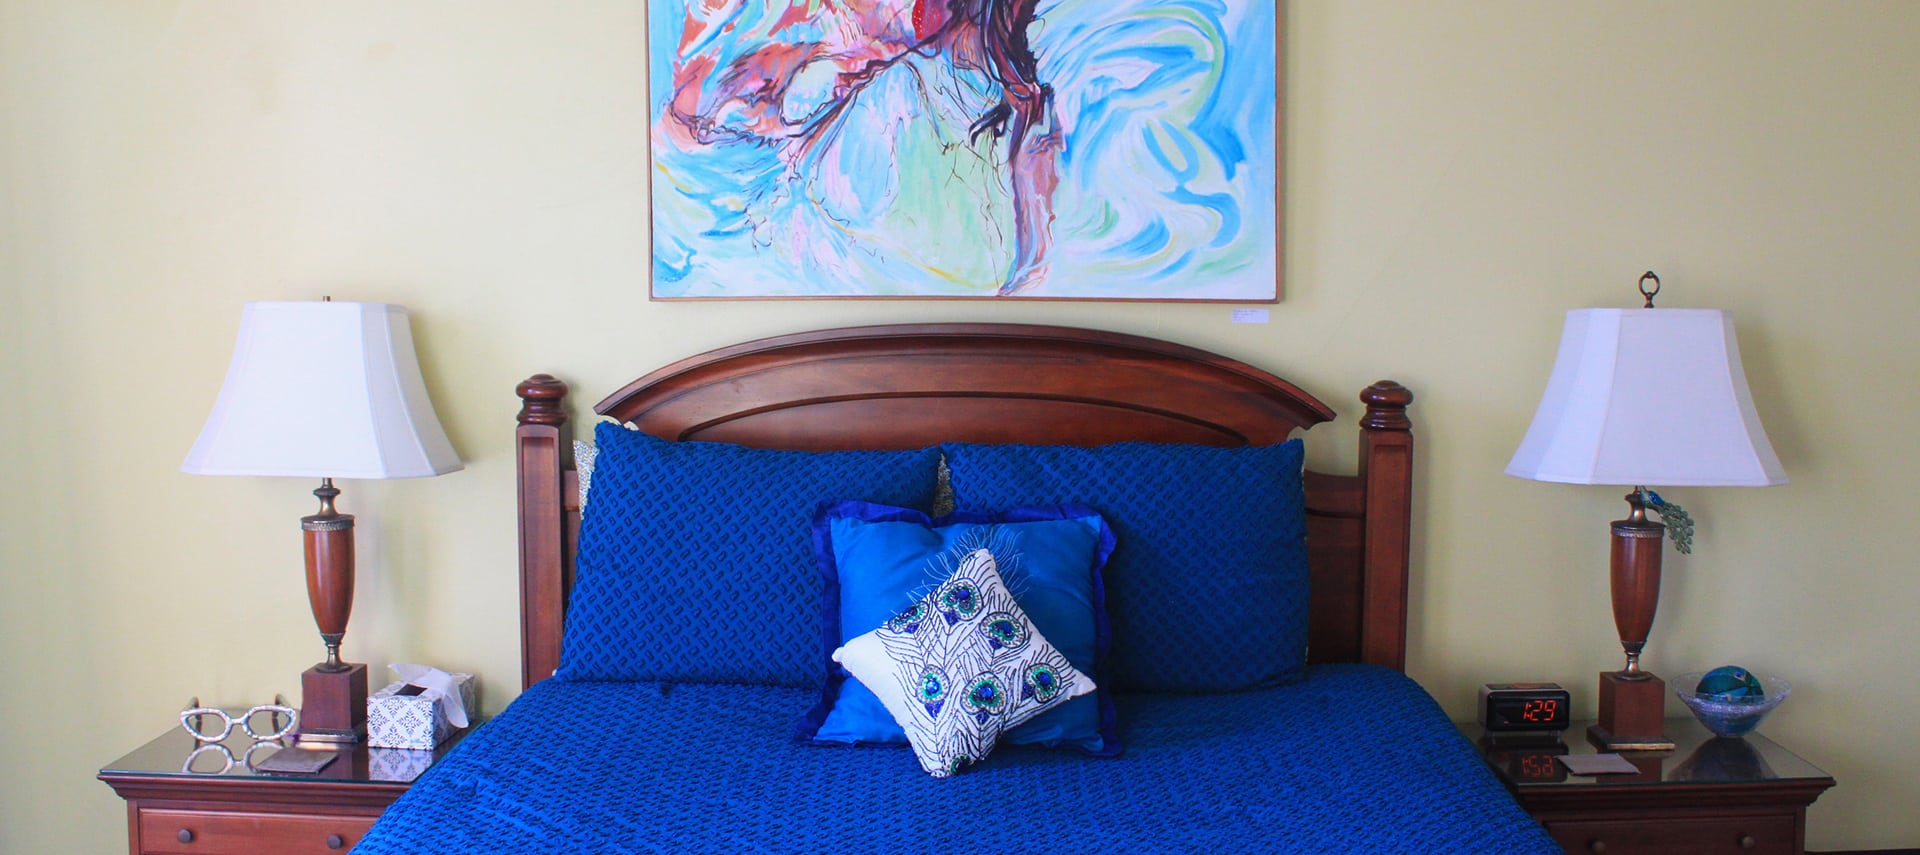 A queen bed with dark brown headboard and peacock blue bedspread in a room with pale yellow walls. A painting of a woman in a pool hangs on the wall above the headboard.